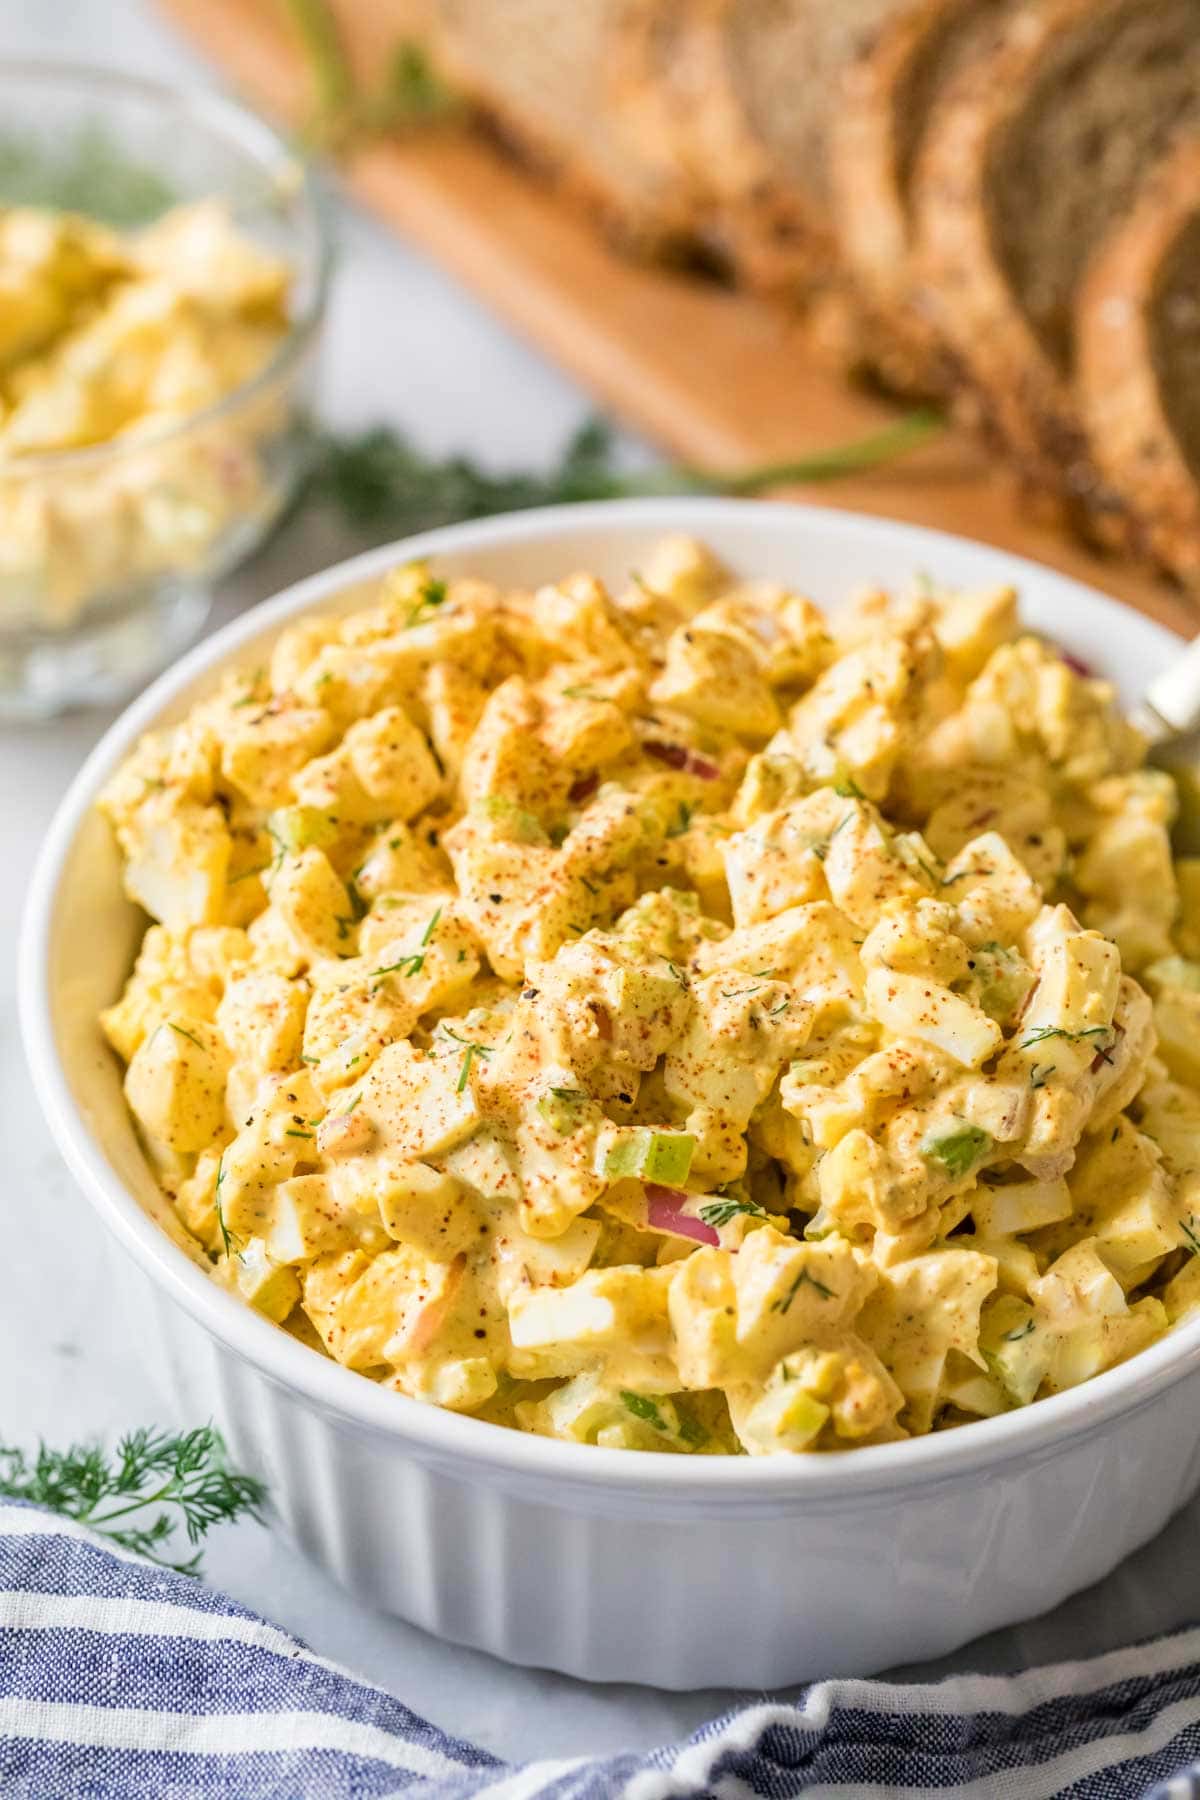 Egg salad in a white serving dish.